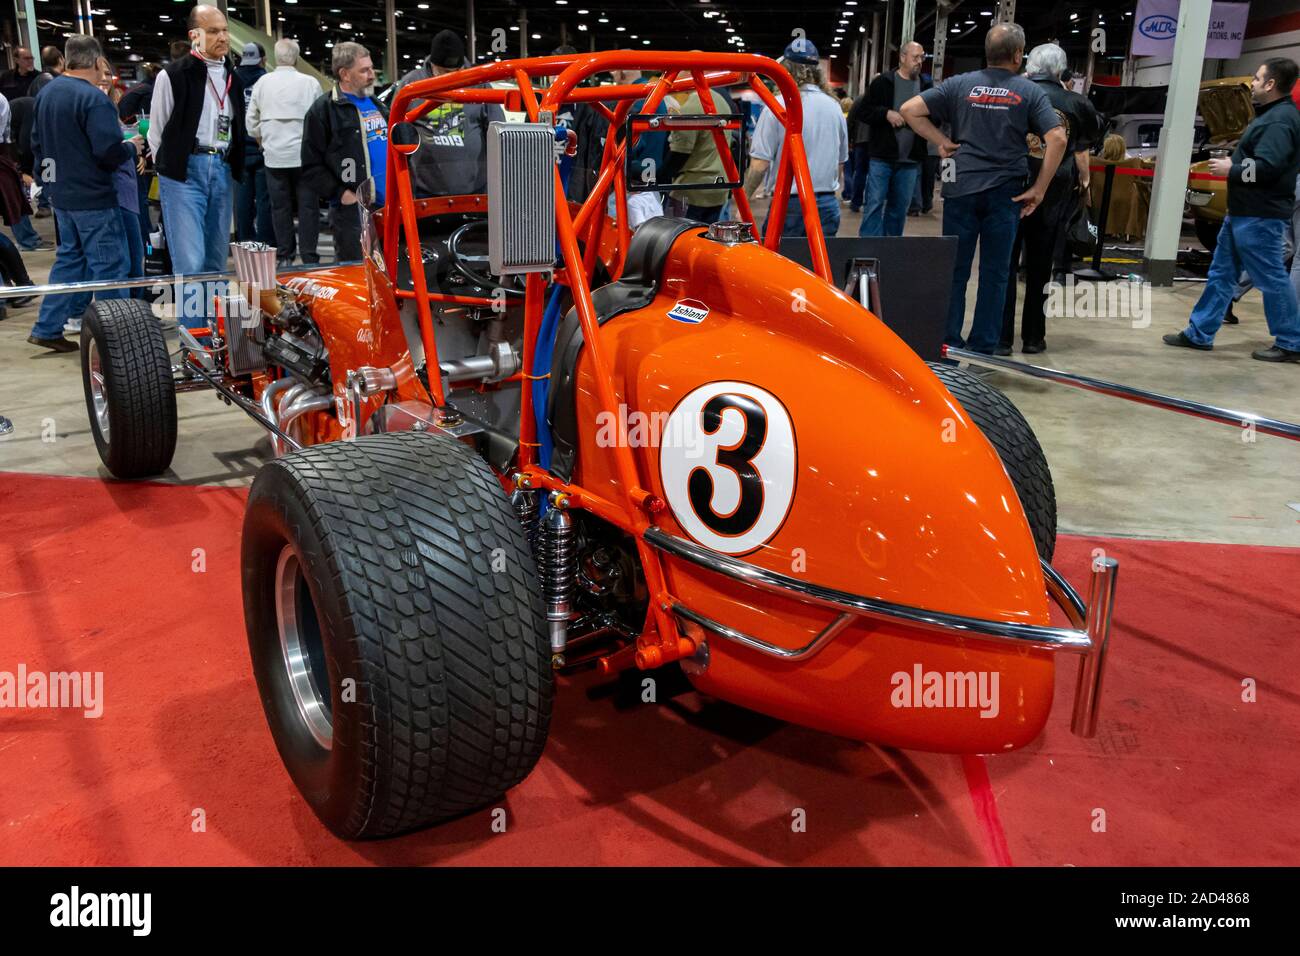 Rosemont, Illinois, United States - November 23, 2019 - 1972 A.J. Foyt Dirt Champ Tribute car at the 2019 Muscle Car and Corvette Nationals in Rosemon Stock Photo